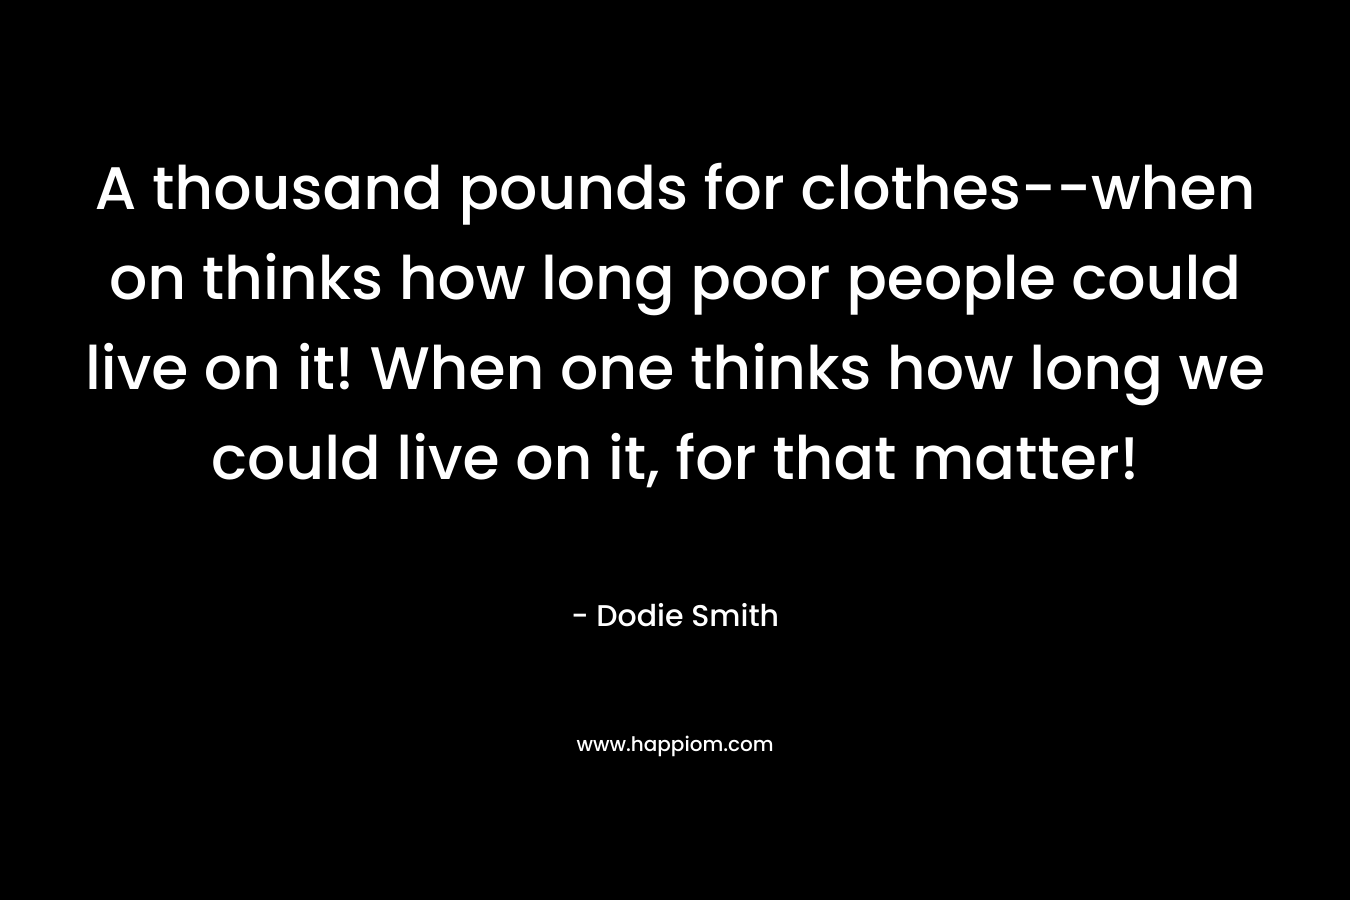 A thousand pounds for clothes–when on thinks how long poor people could live on it! When one thinks how long we could live on it, for that matter! – Dodie Smith